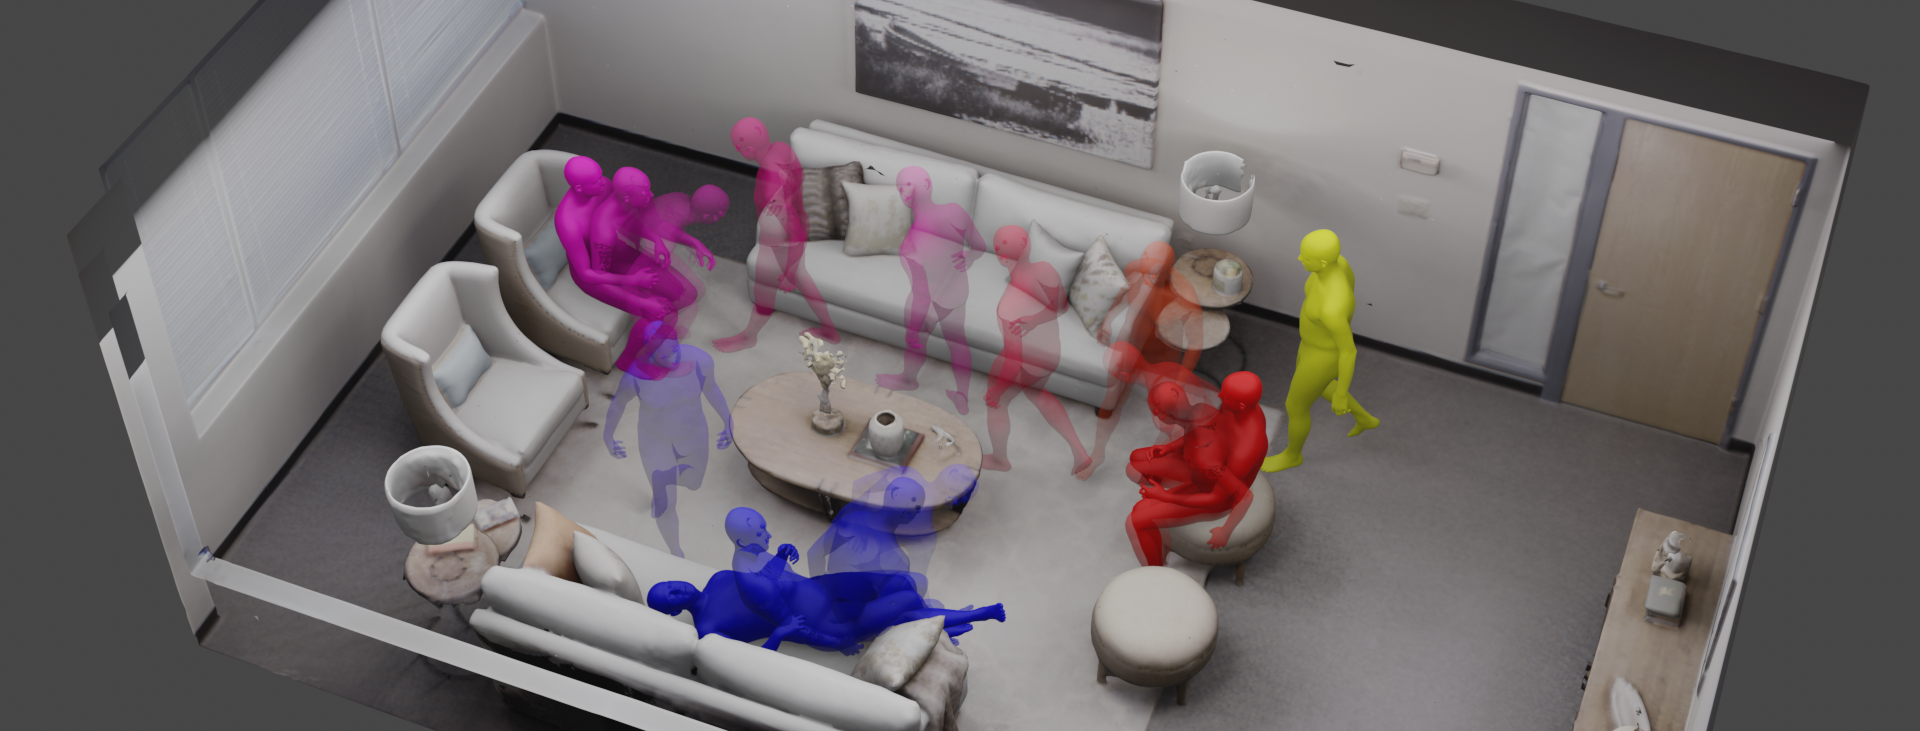 DIMOS: Synthesizing Diverse Human Motions in 3D Indoor Scenes